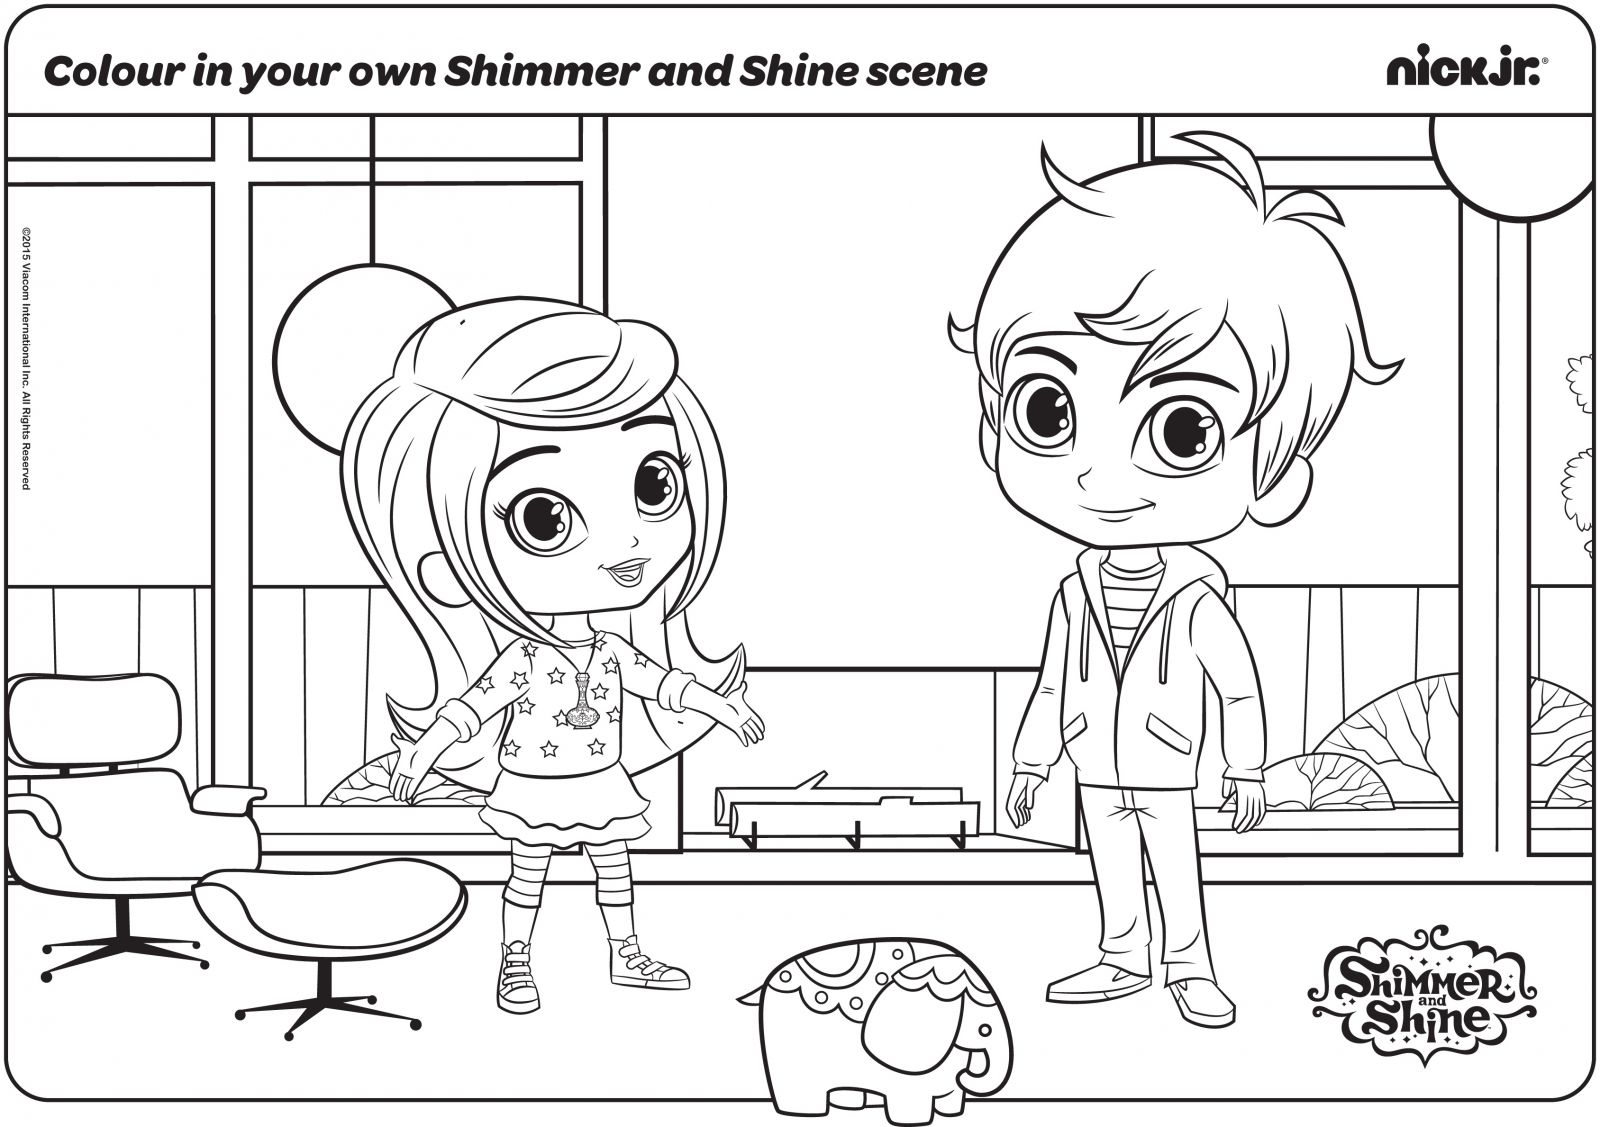 Colour In Your Own Shimmer And Shine Scene